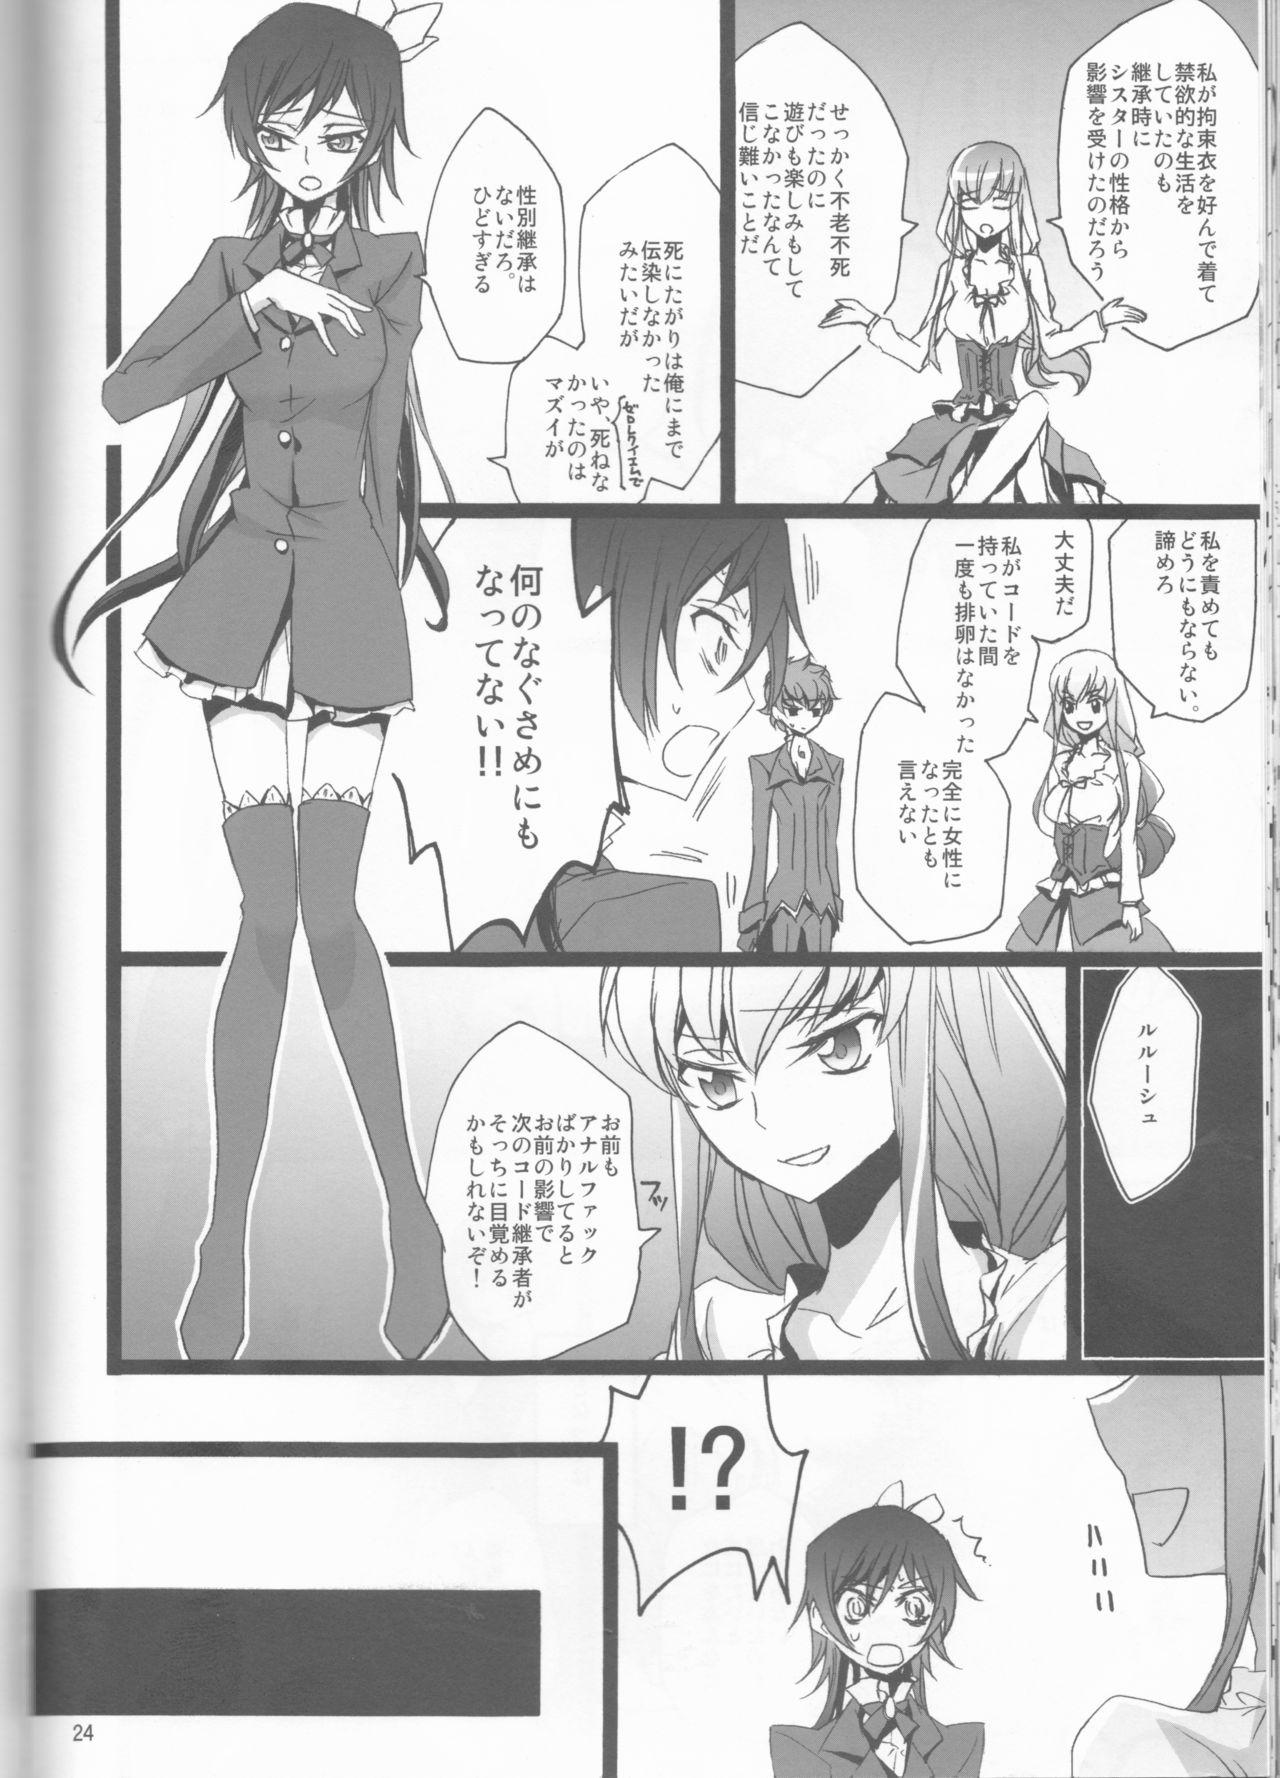 Pale Chameleon Girl - Code geass Gay Shorthair - Page 24